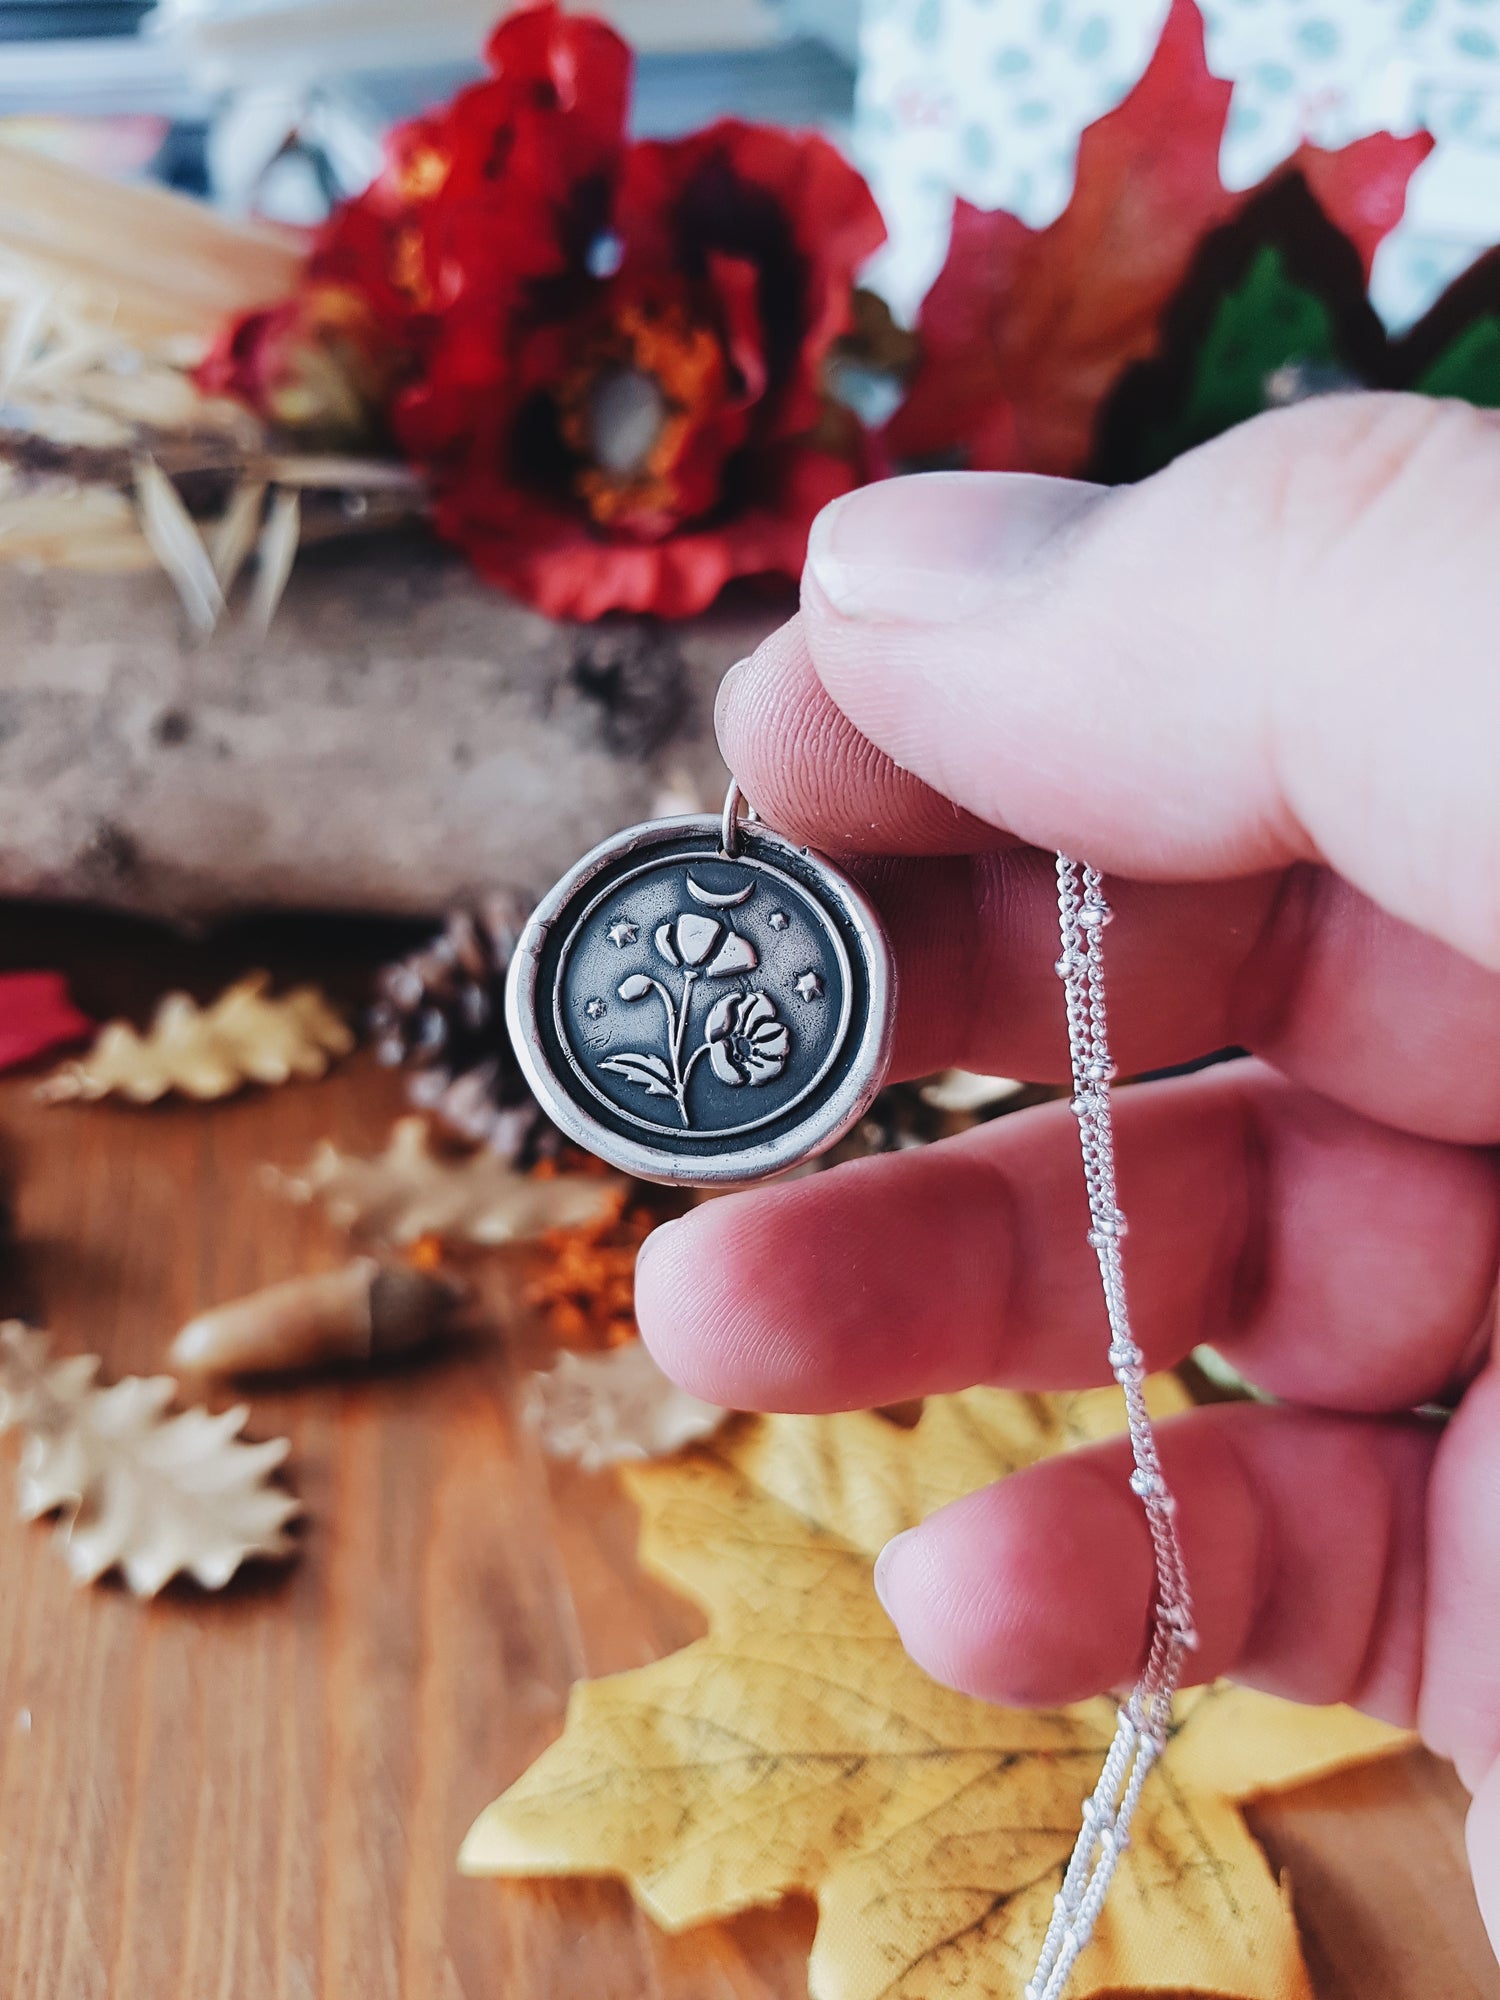 Floral Pendant Necklace POPPY PAPAVER TALISMAN STERLING SILVER AMULET HERBAL FLORAL NECKLACE PENDANT MOON STARS WITCH